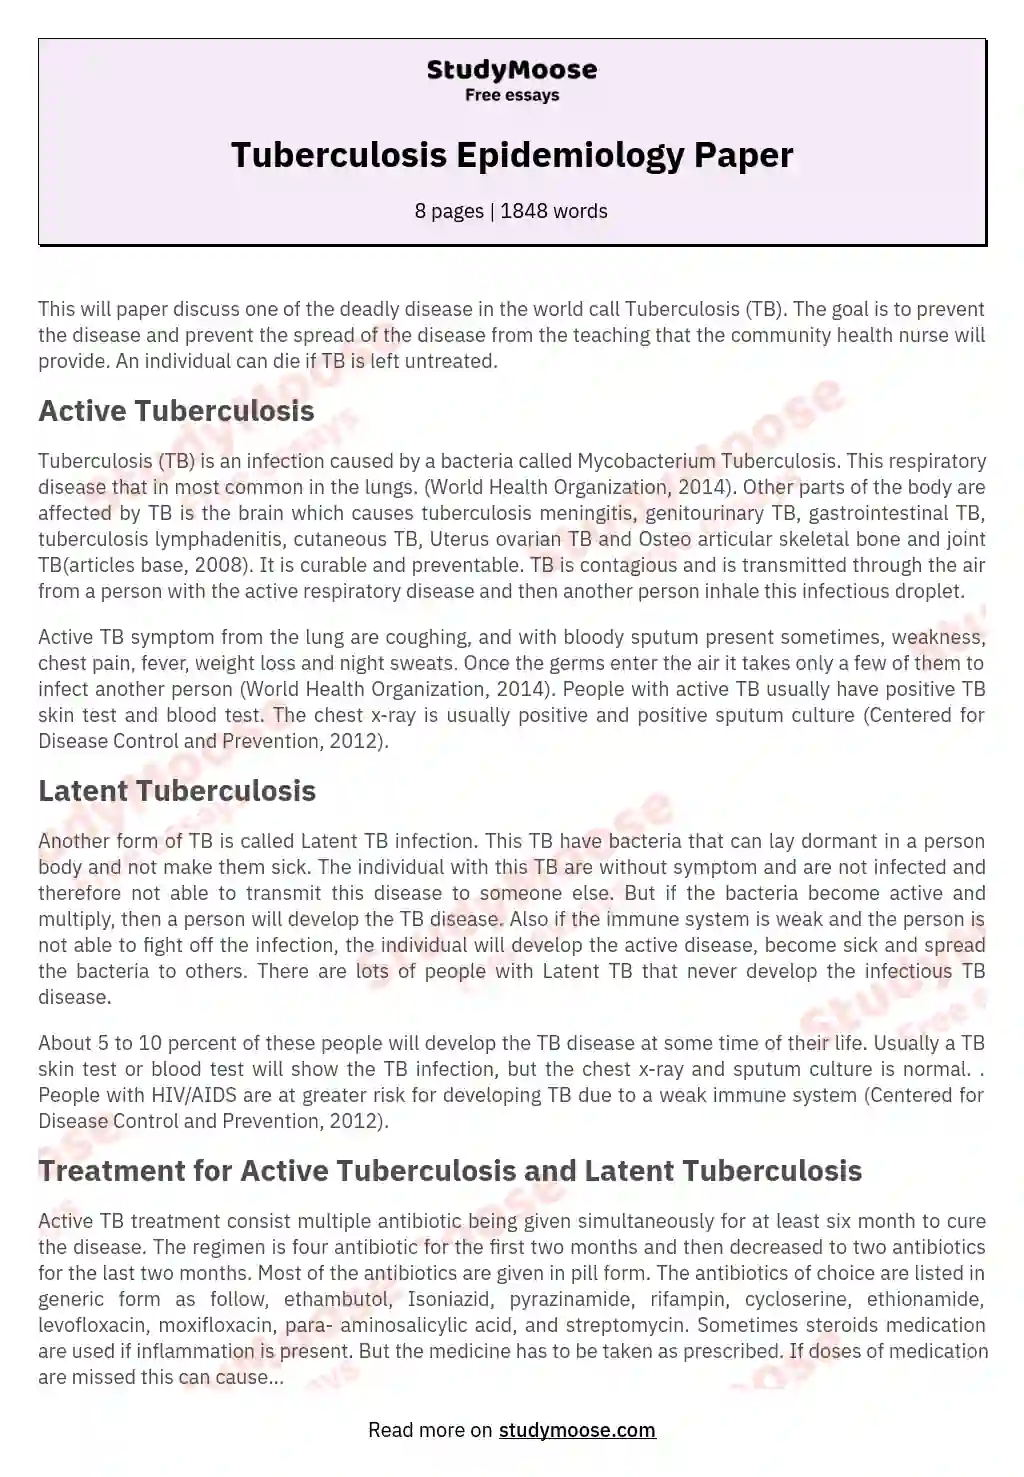 Tuberculosis Epidemiology Paper essay